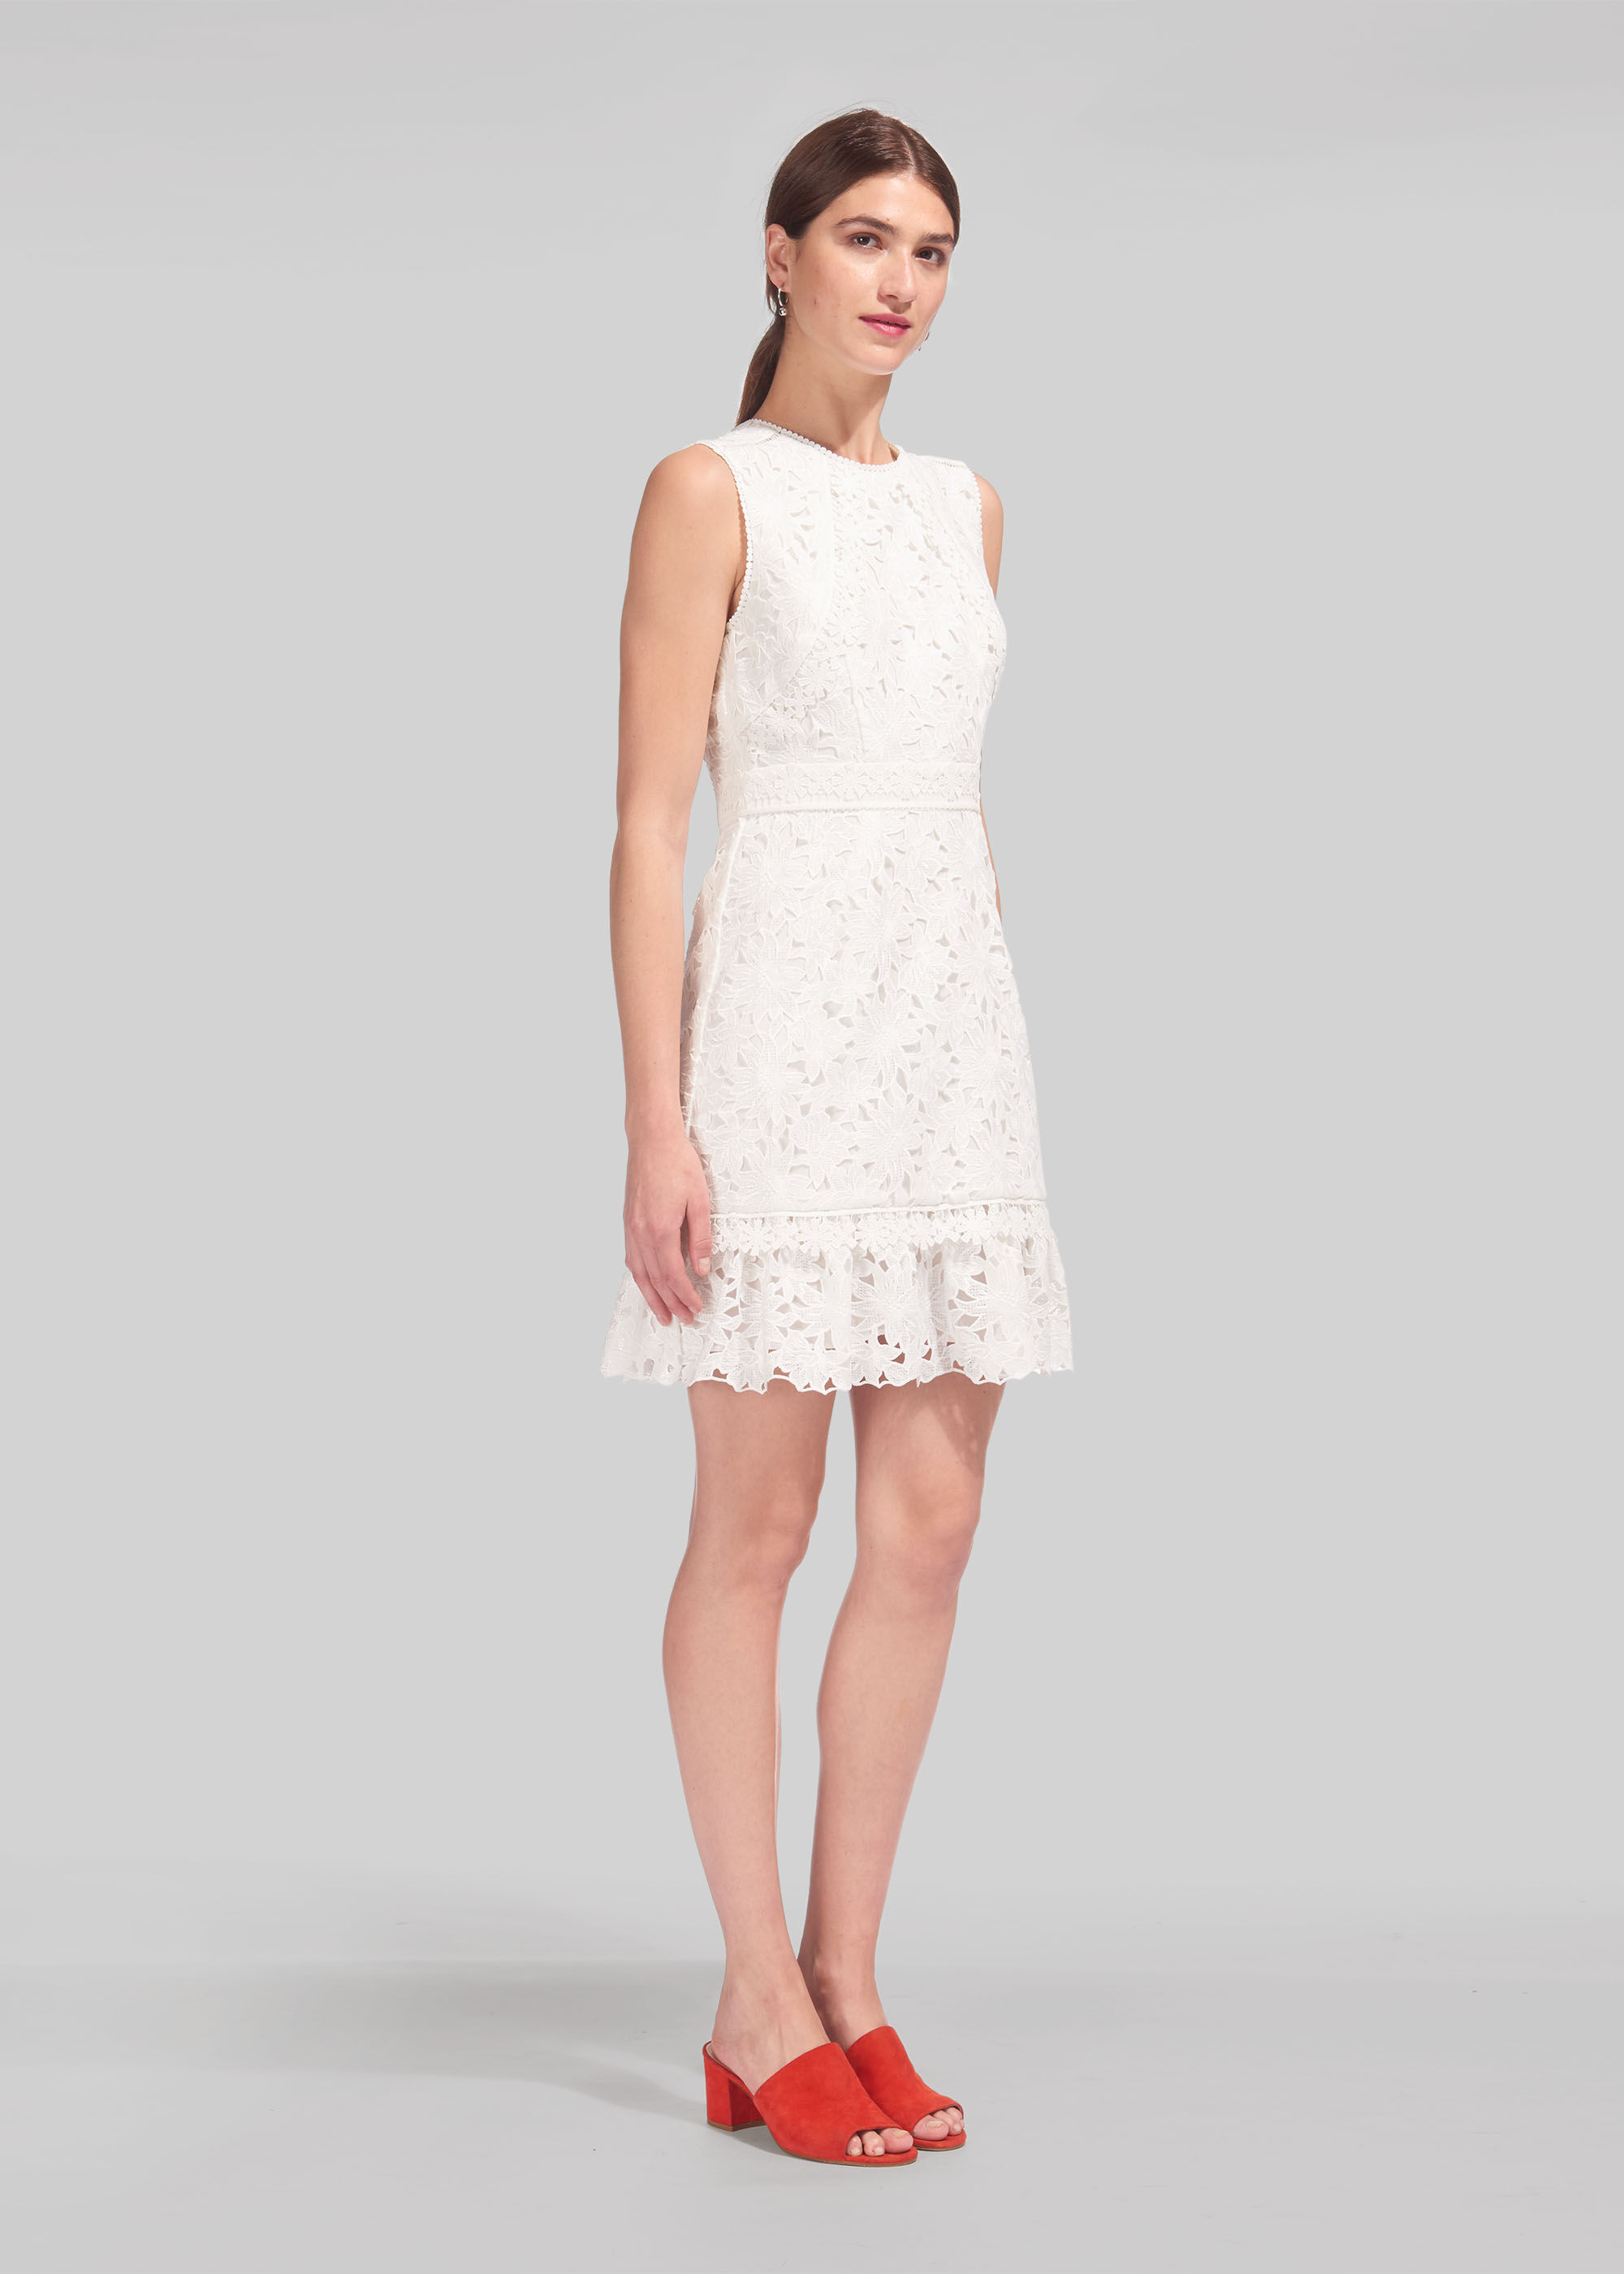 Whistles White Dress on Sale, UP TO 53 ...